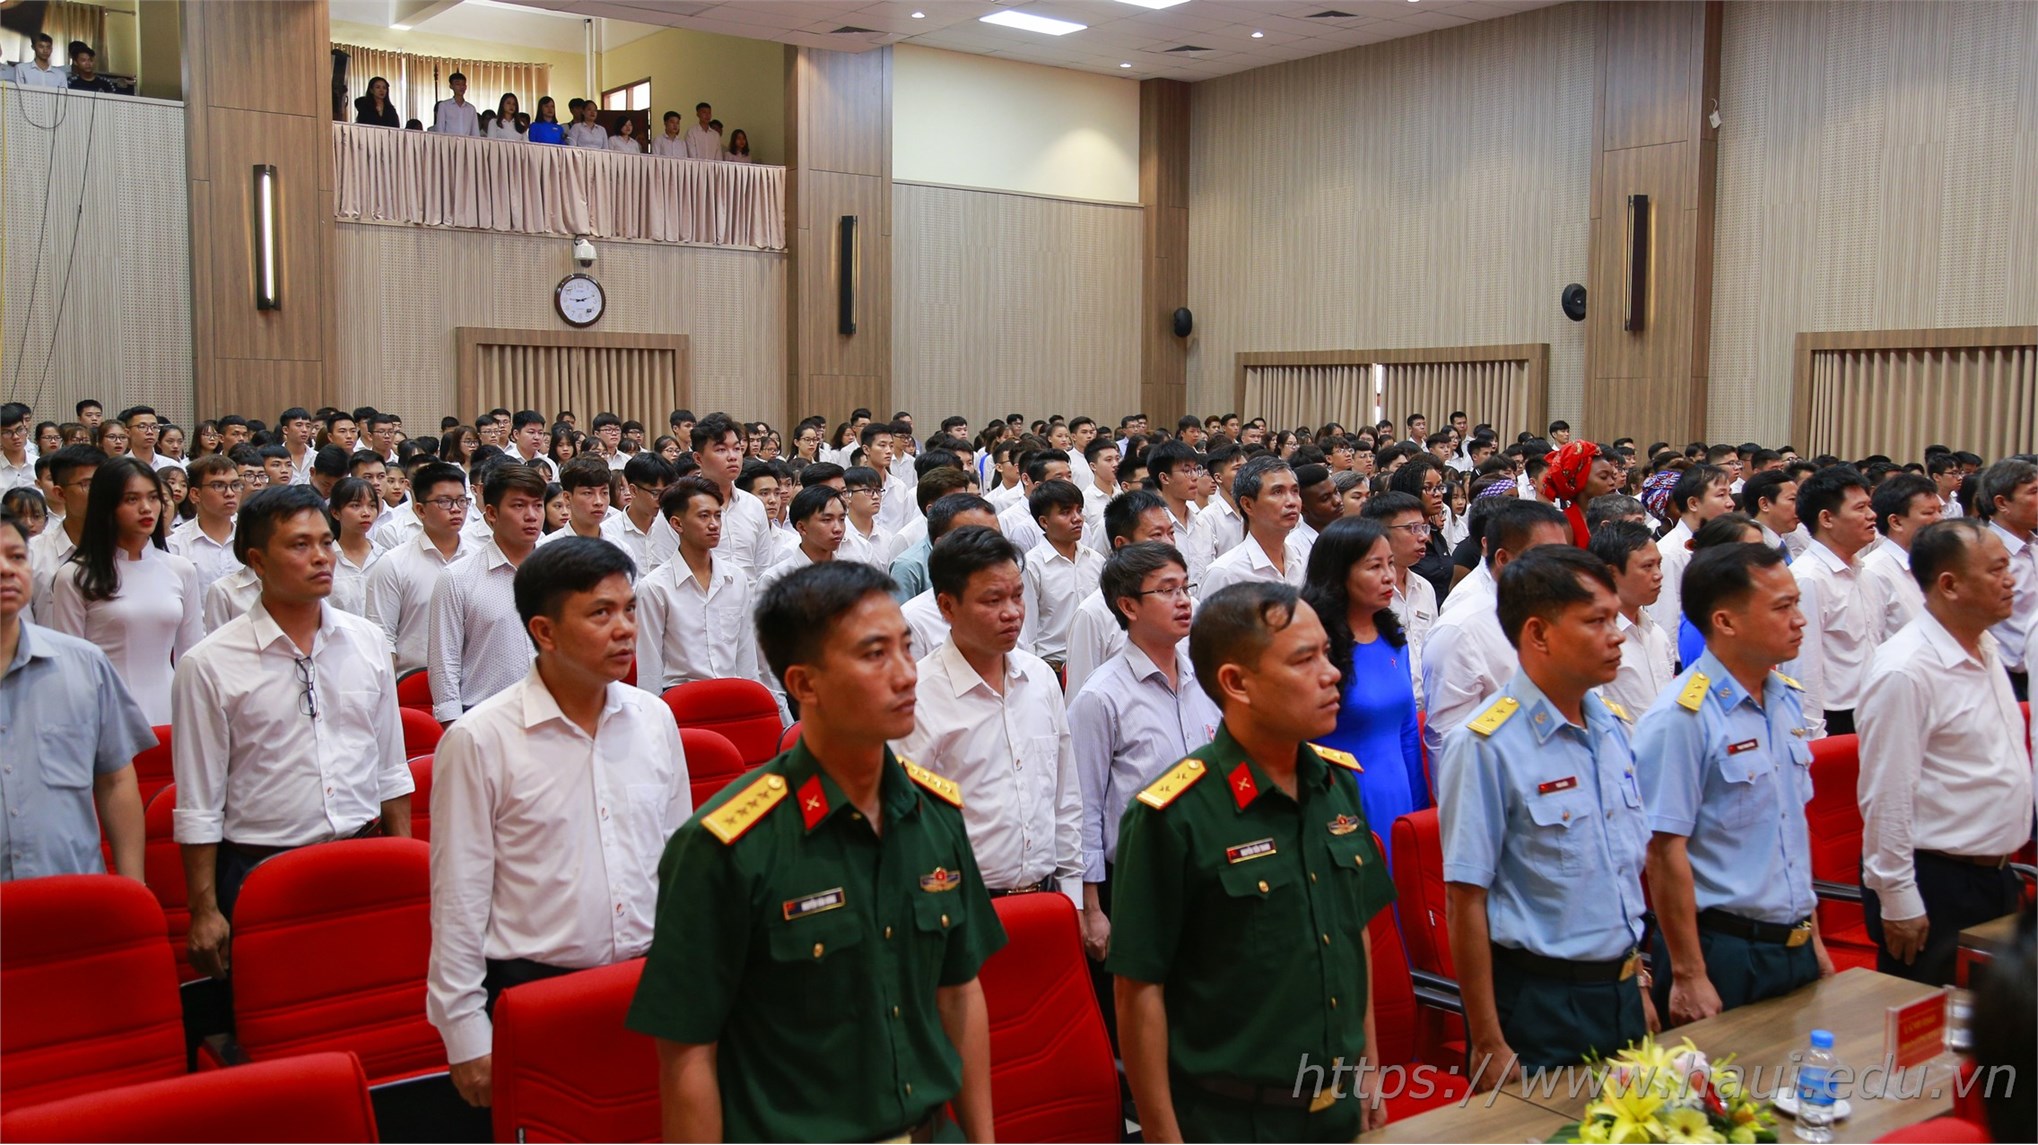 The Opening Ceremony of the New 2019 - 2020 Academic Year